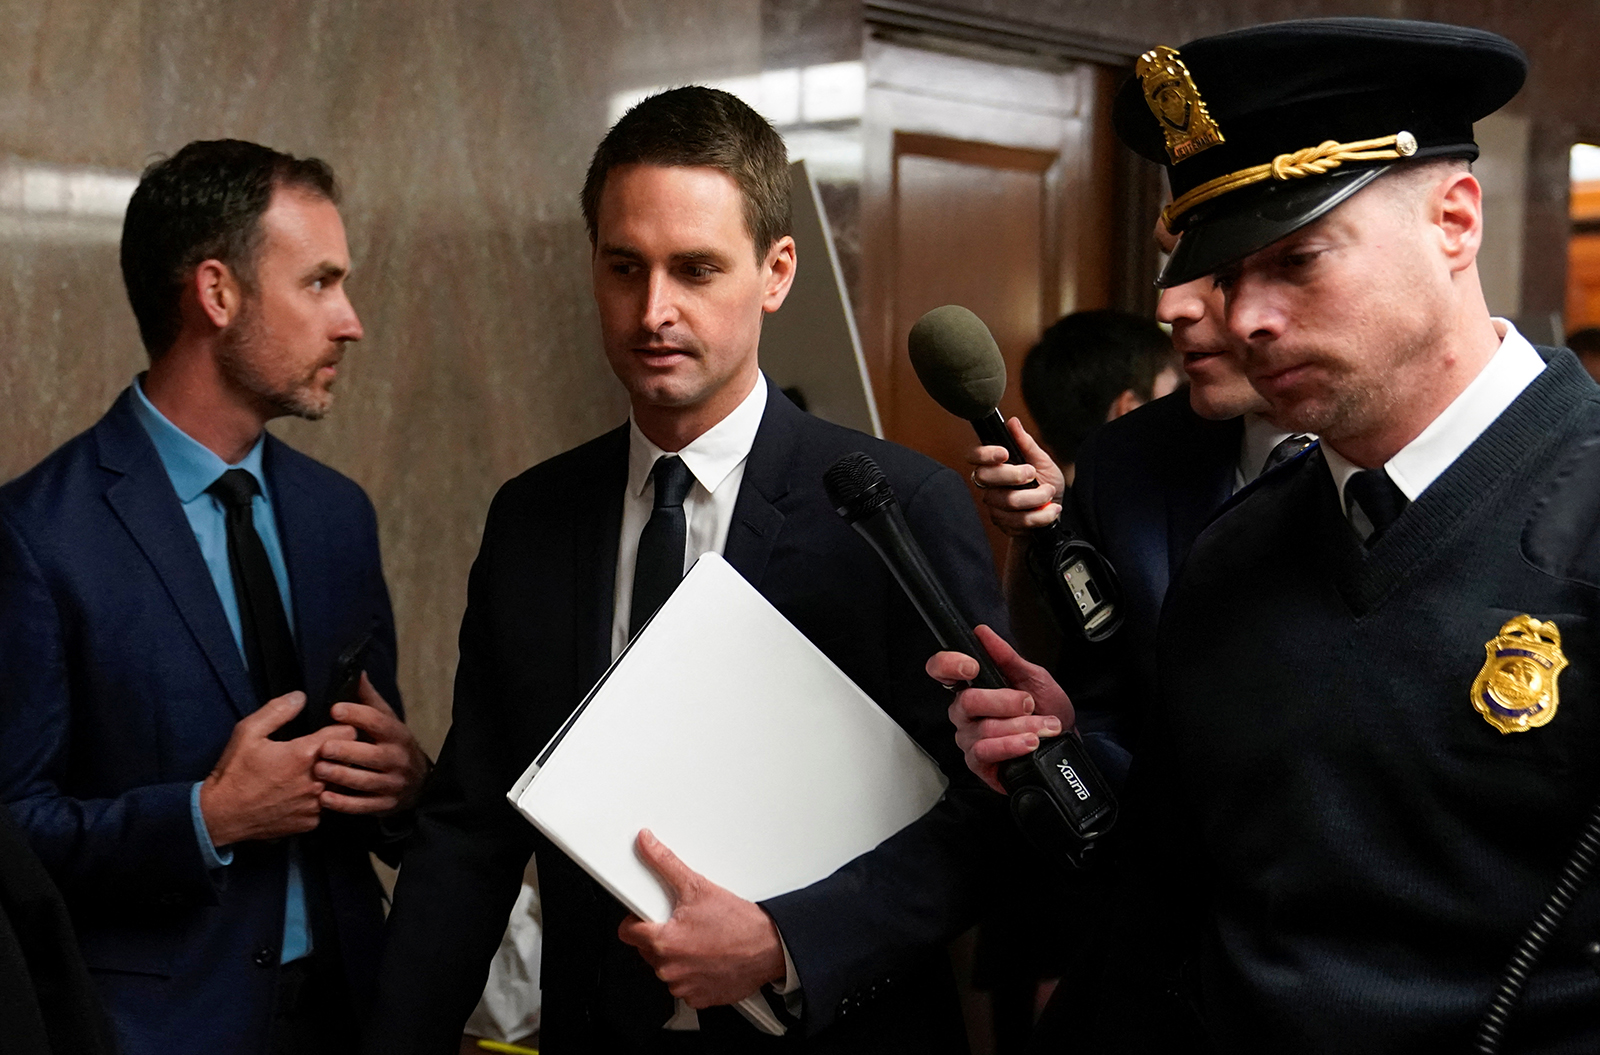 Co-founder and CEO of Snap Inc. Evan Spiegel attends the Senate Judiciary Committee hearing on online child sexual exploitation at the U.S. Capitol, in Washington, on January 31.